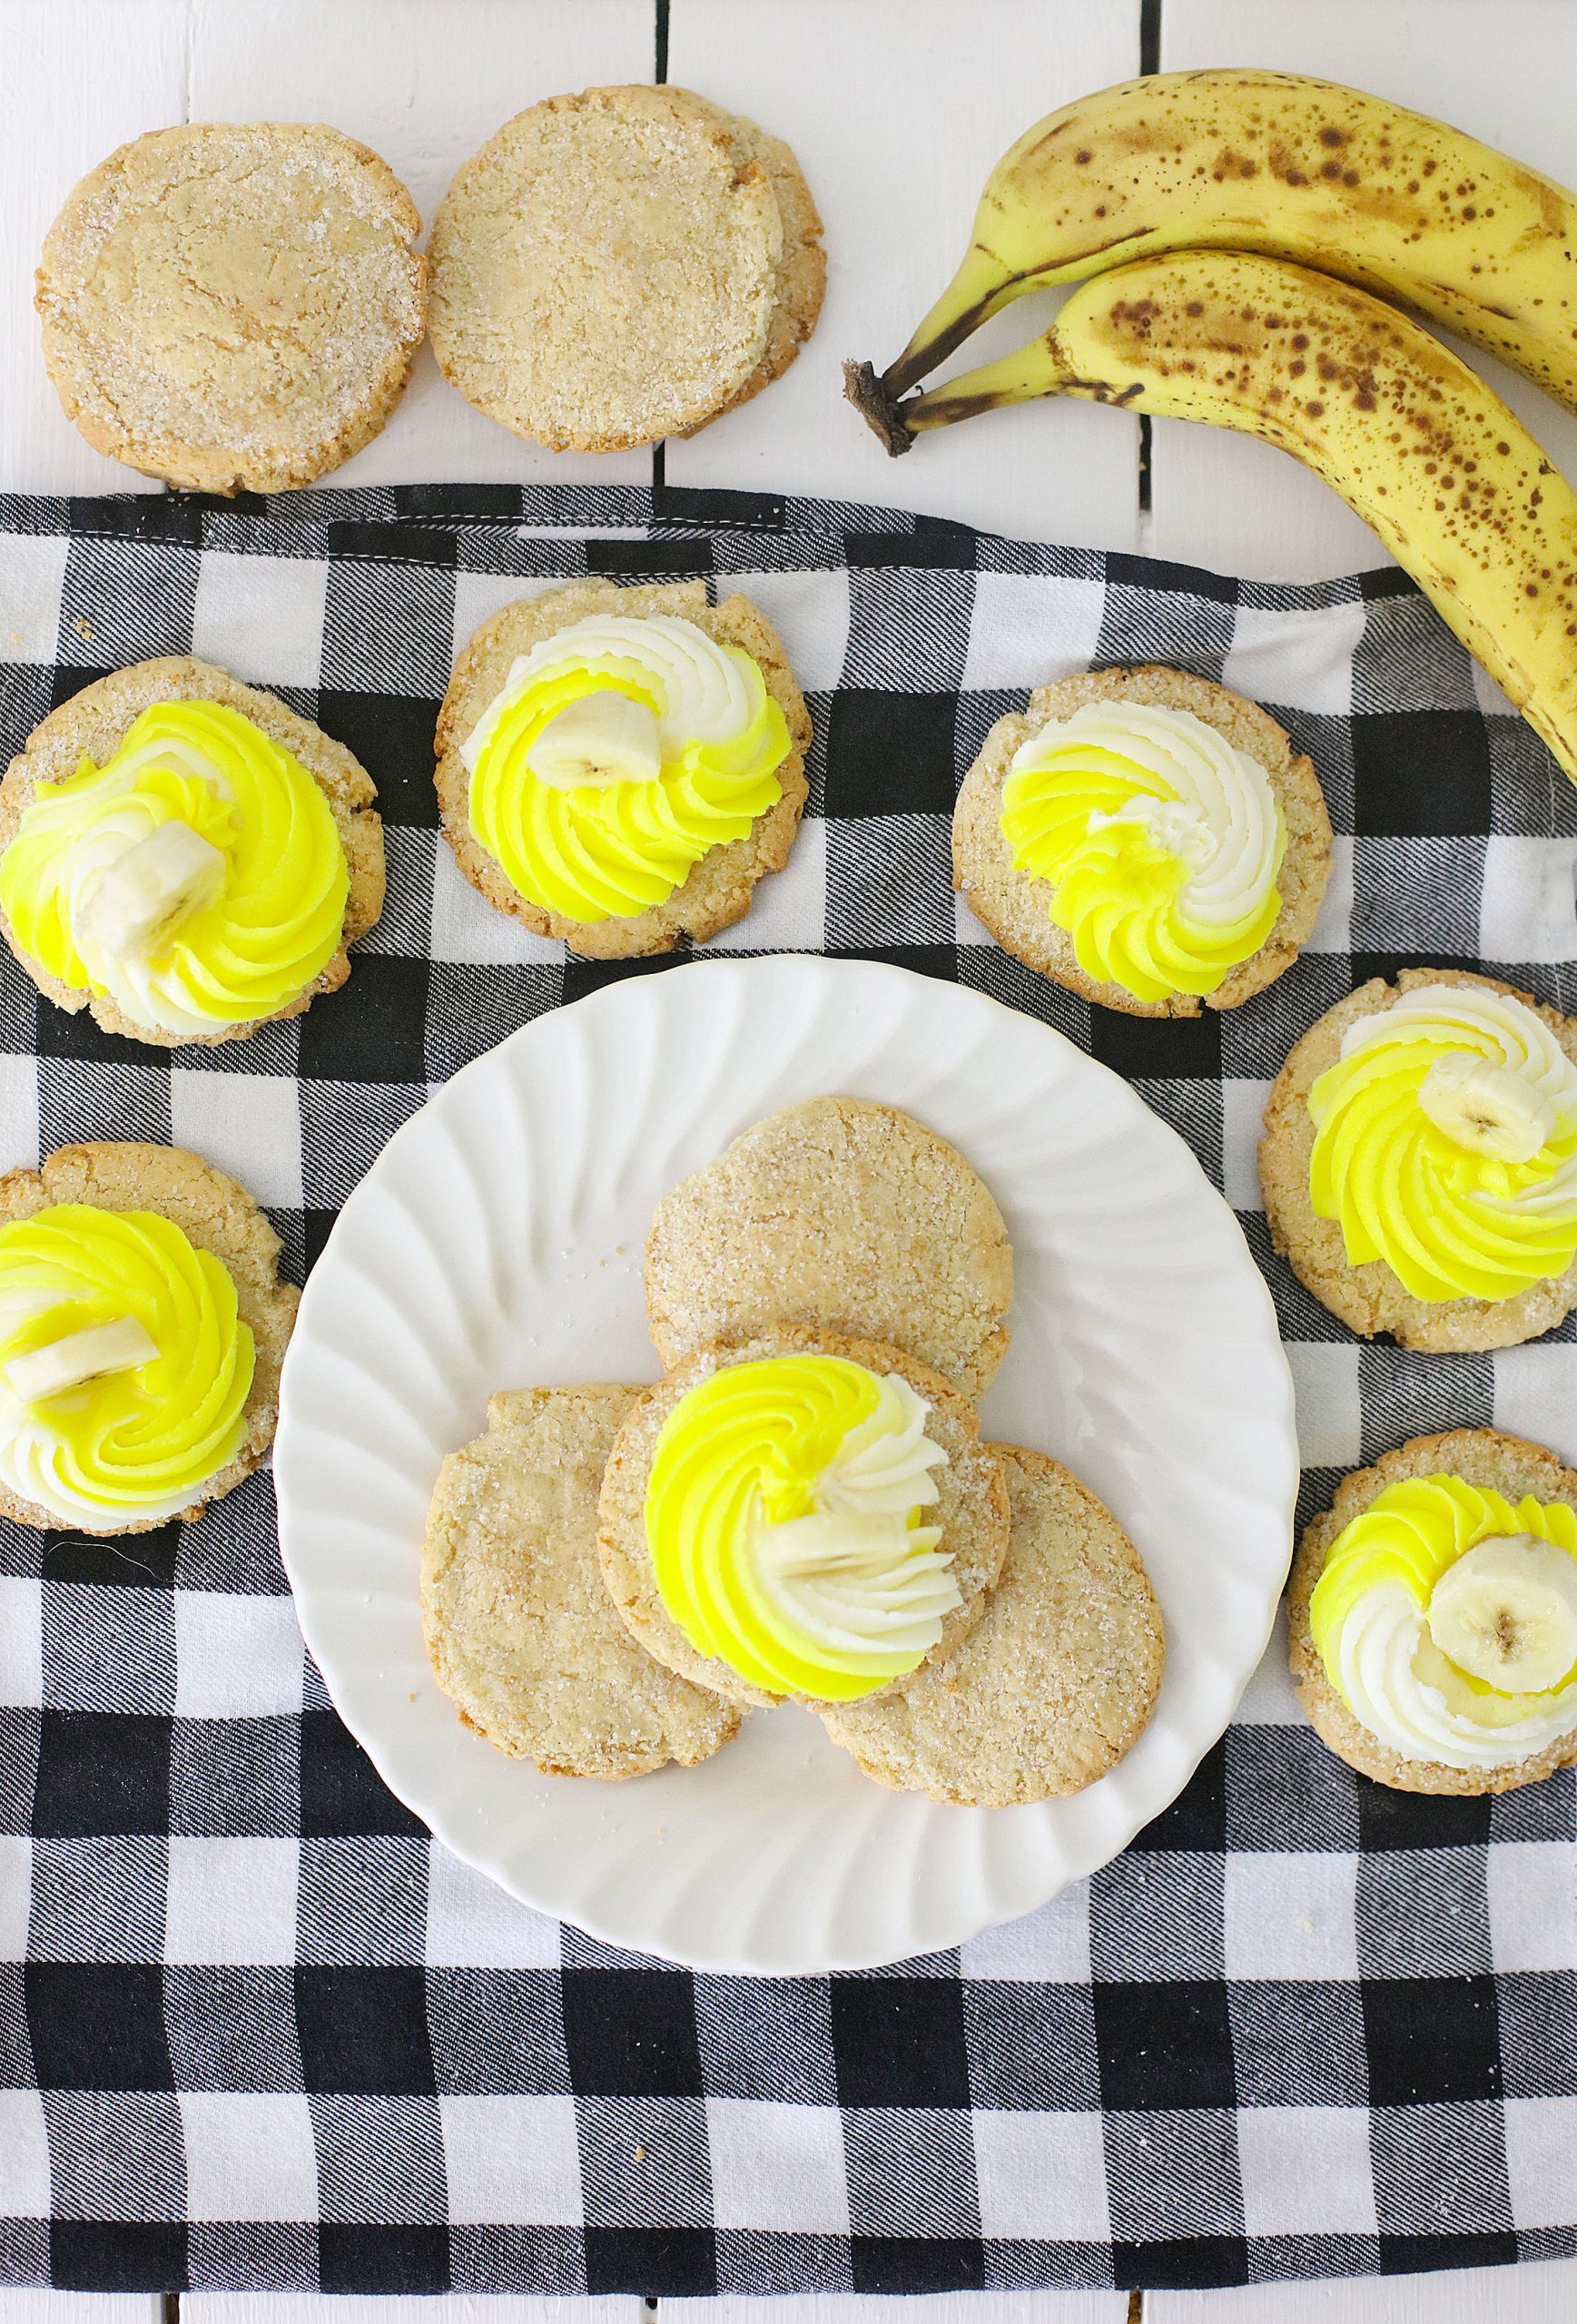 Overhead image of banana cookies decorated with white and yellow cream cheese frosting and banana slices